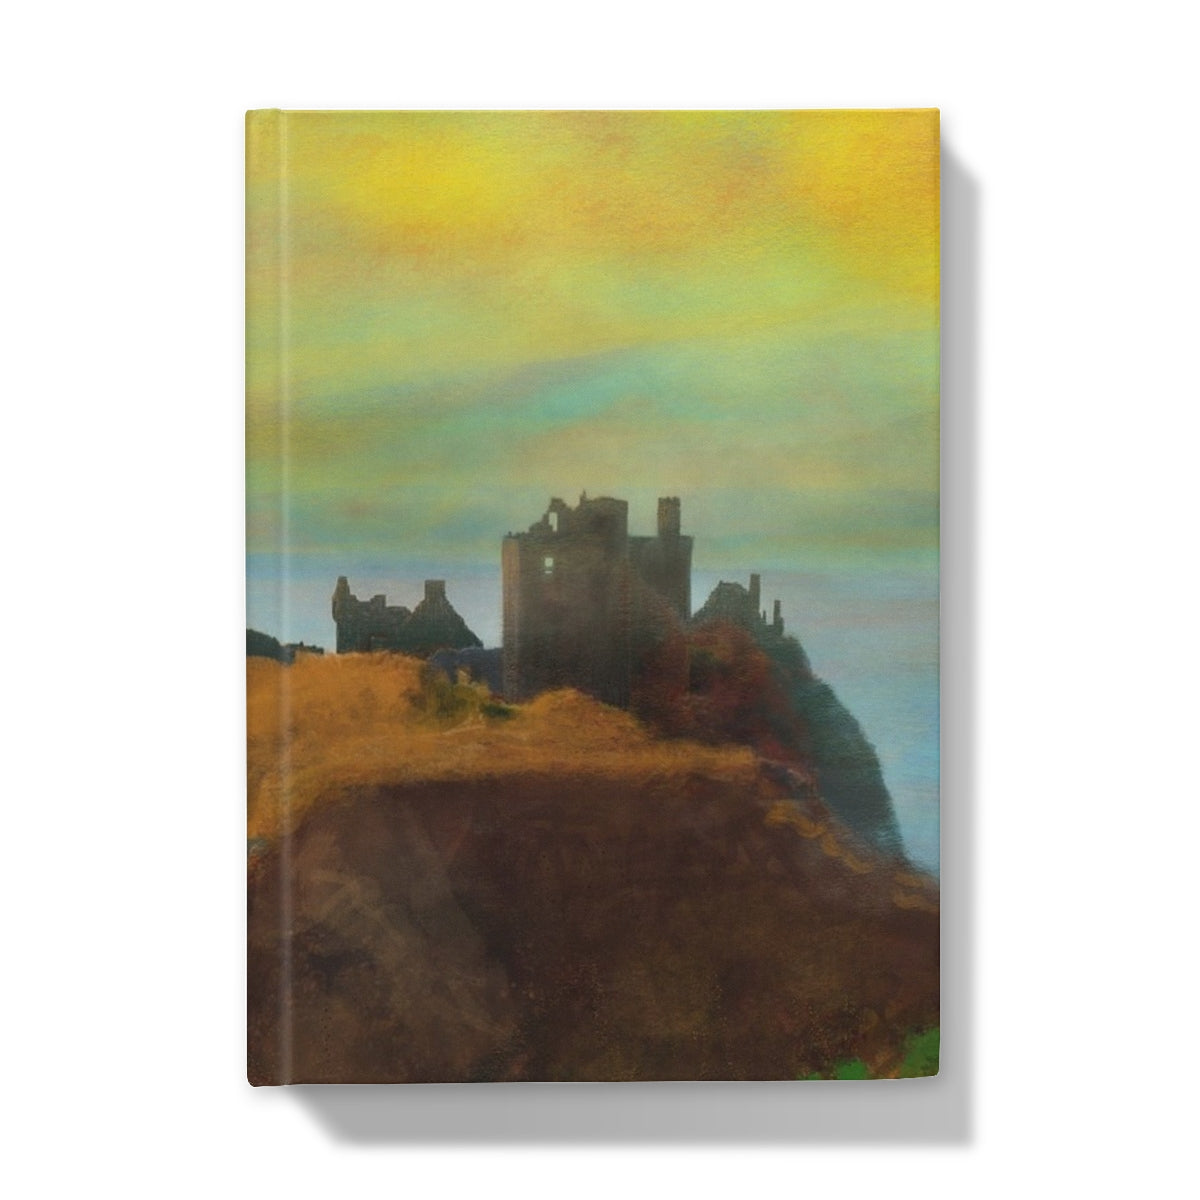 Dunnottar Castle Art Gifts Hardback Journal-Journals & Notebooks-Historic & Iconic Scotland Art Gallery-5"x7"-Lined-Paintings, Prints, Homeware, Art Gifts From Scotland By Scottish Artist Kevin Hunter